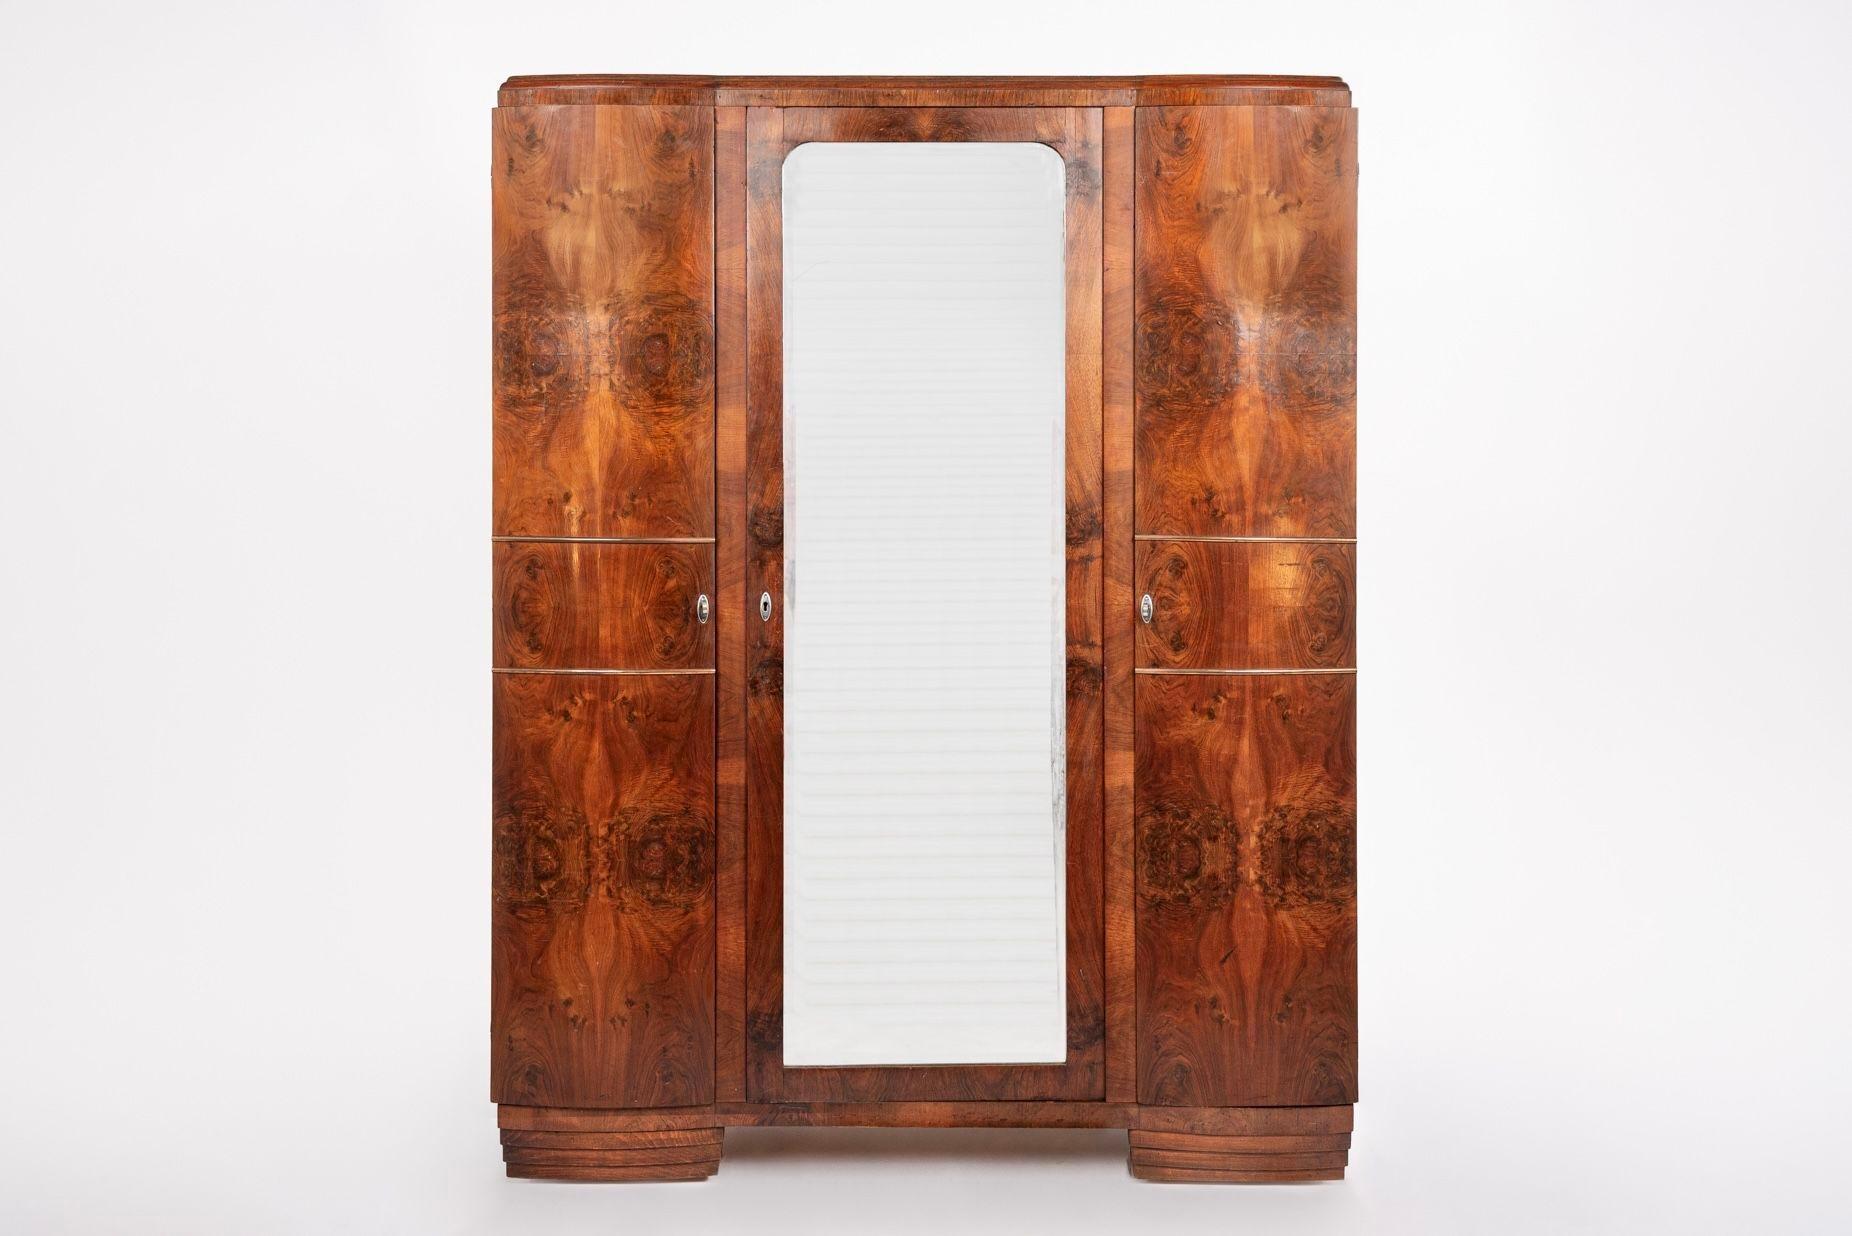 Hand-Crafted Antique Art Deco Burl Wood Mirrored Armoire Cabinet, 1930s